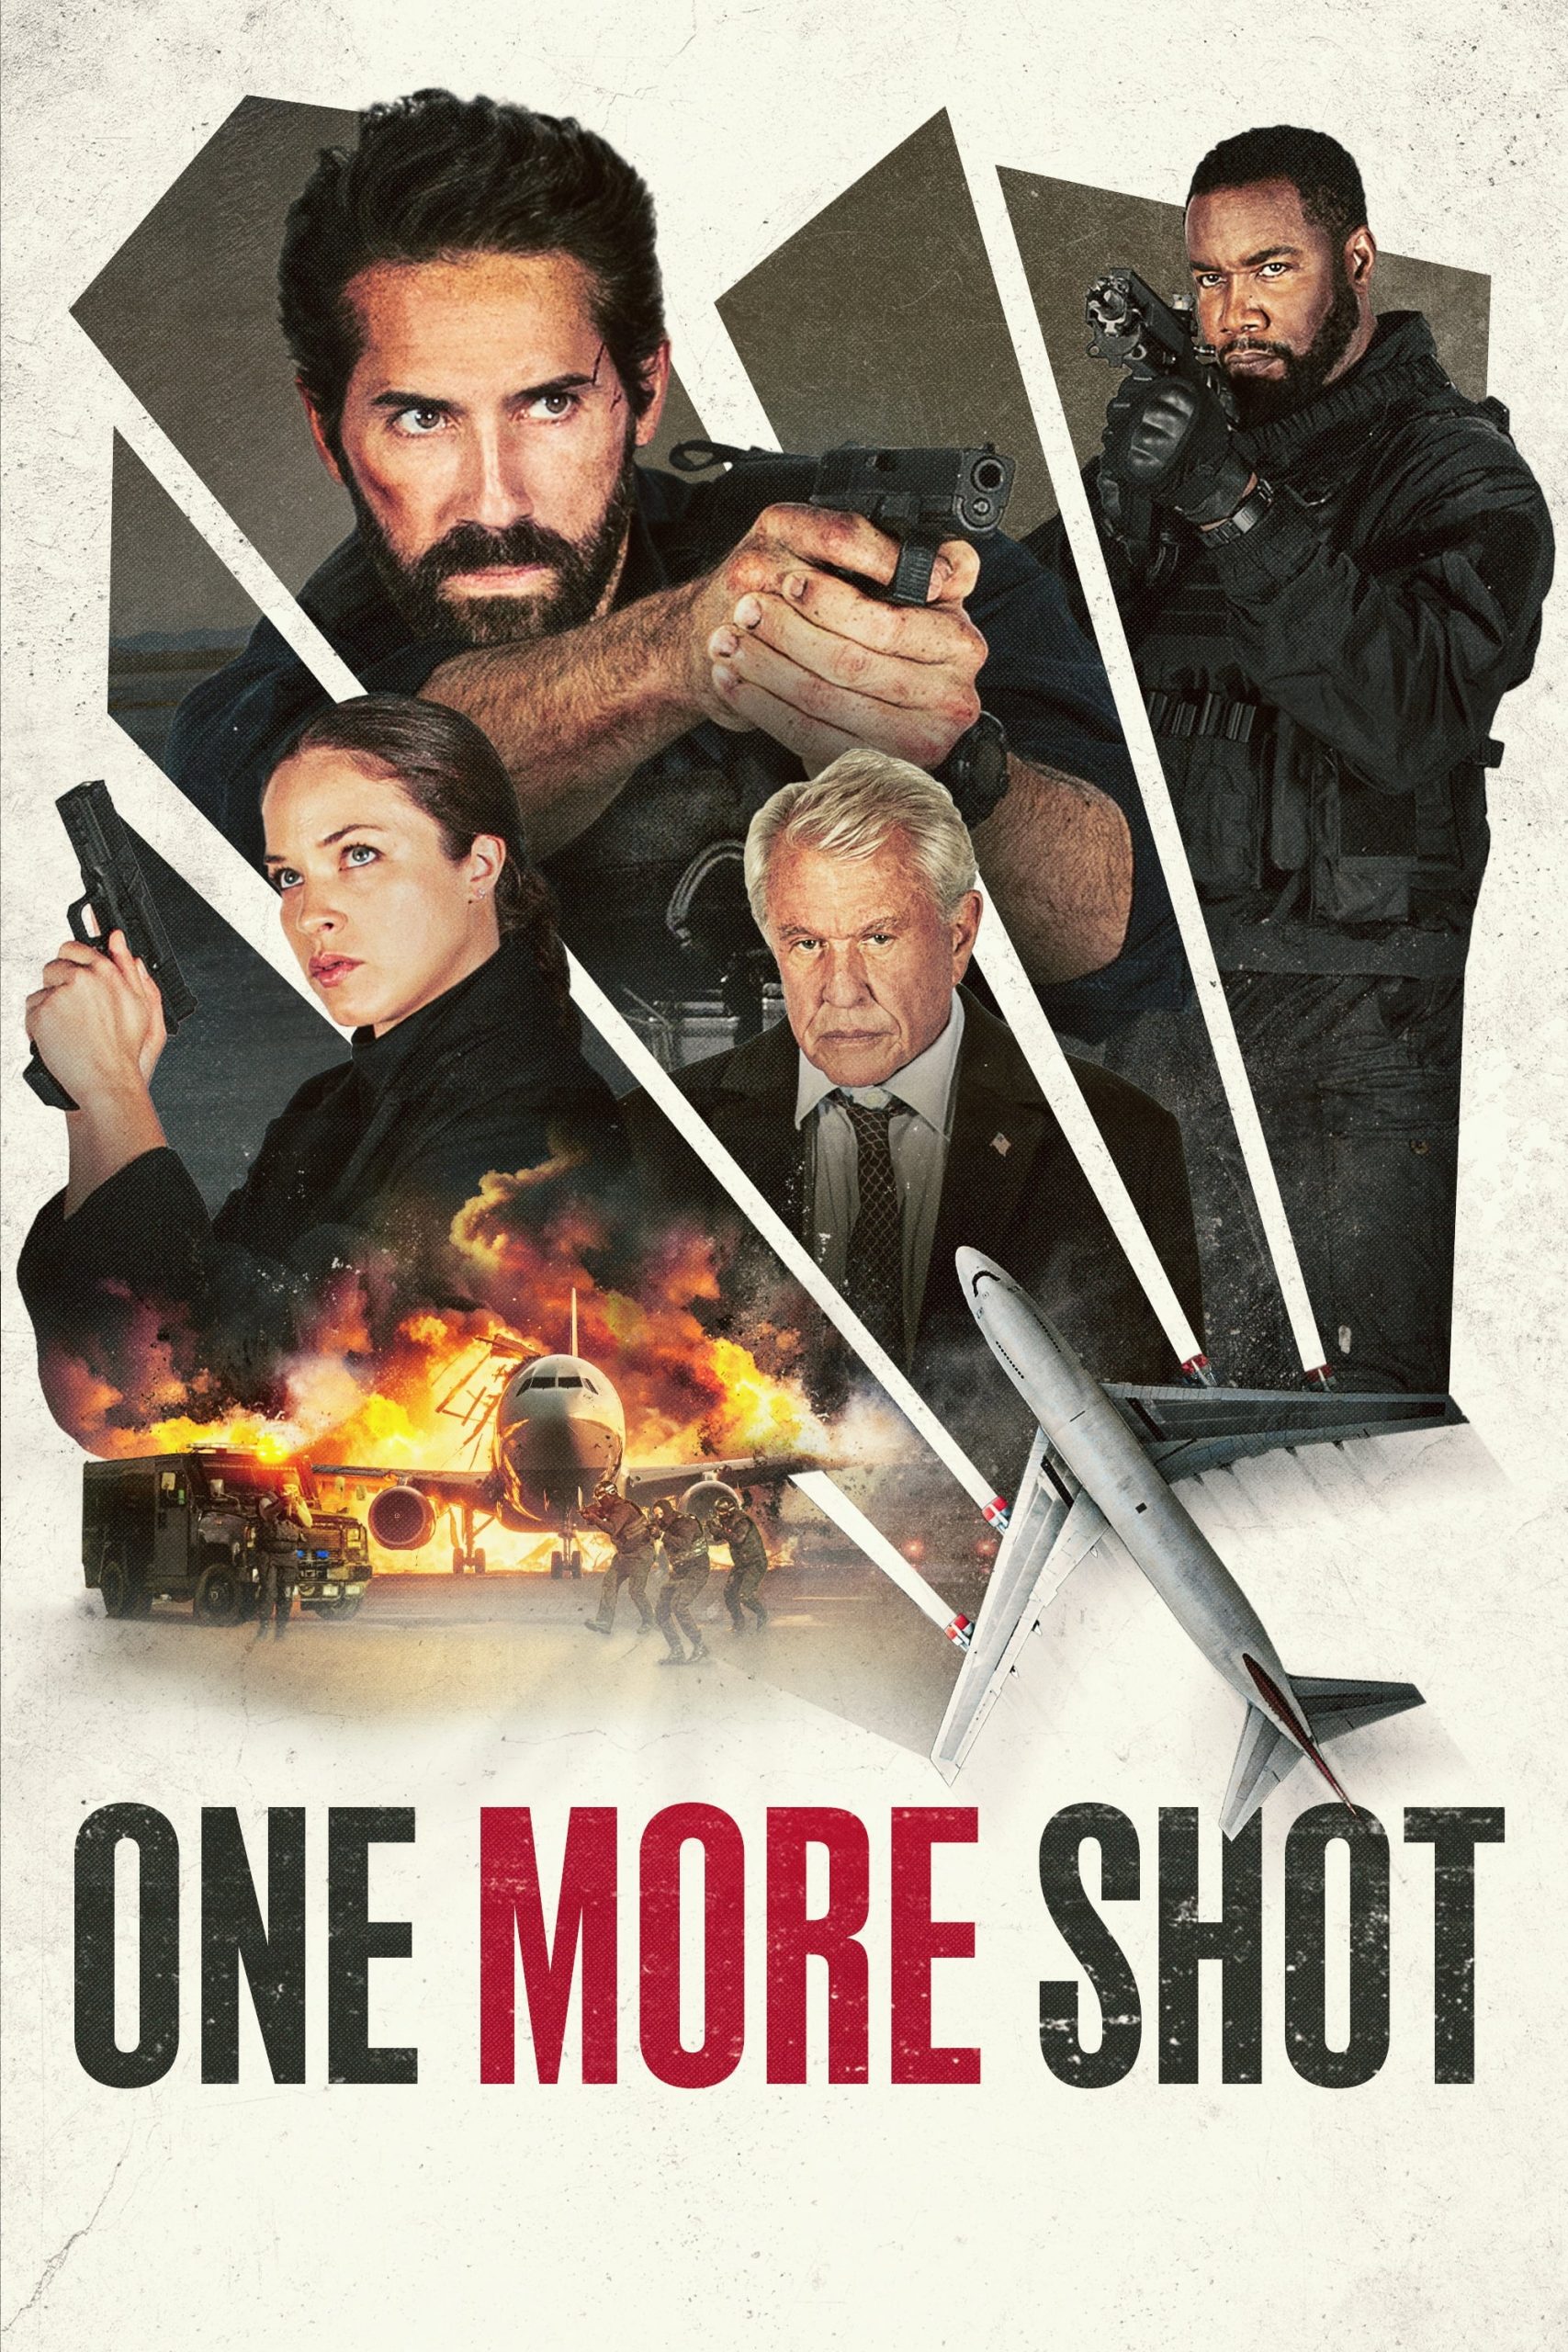 Poster for the movie "One More Shot"